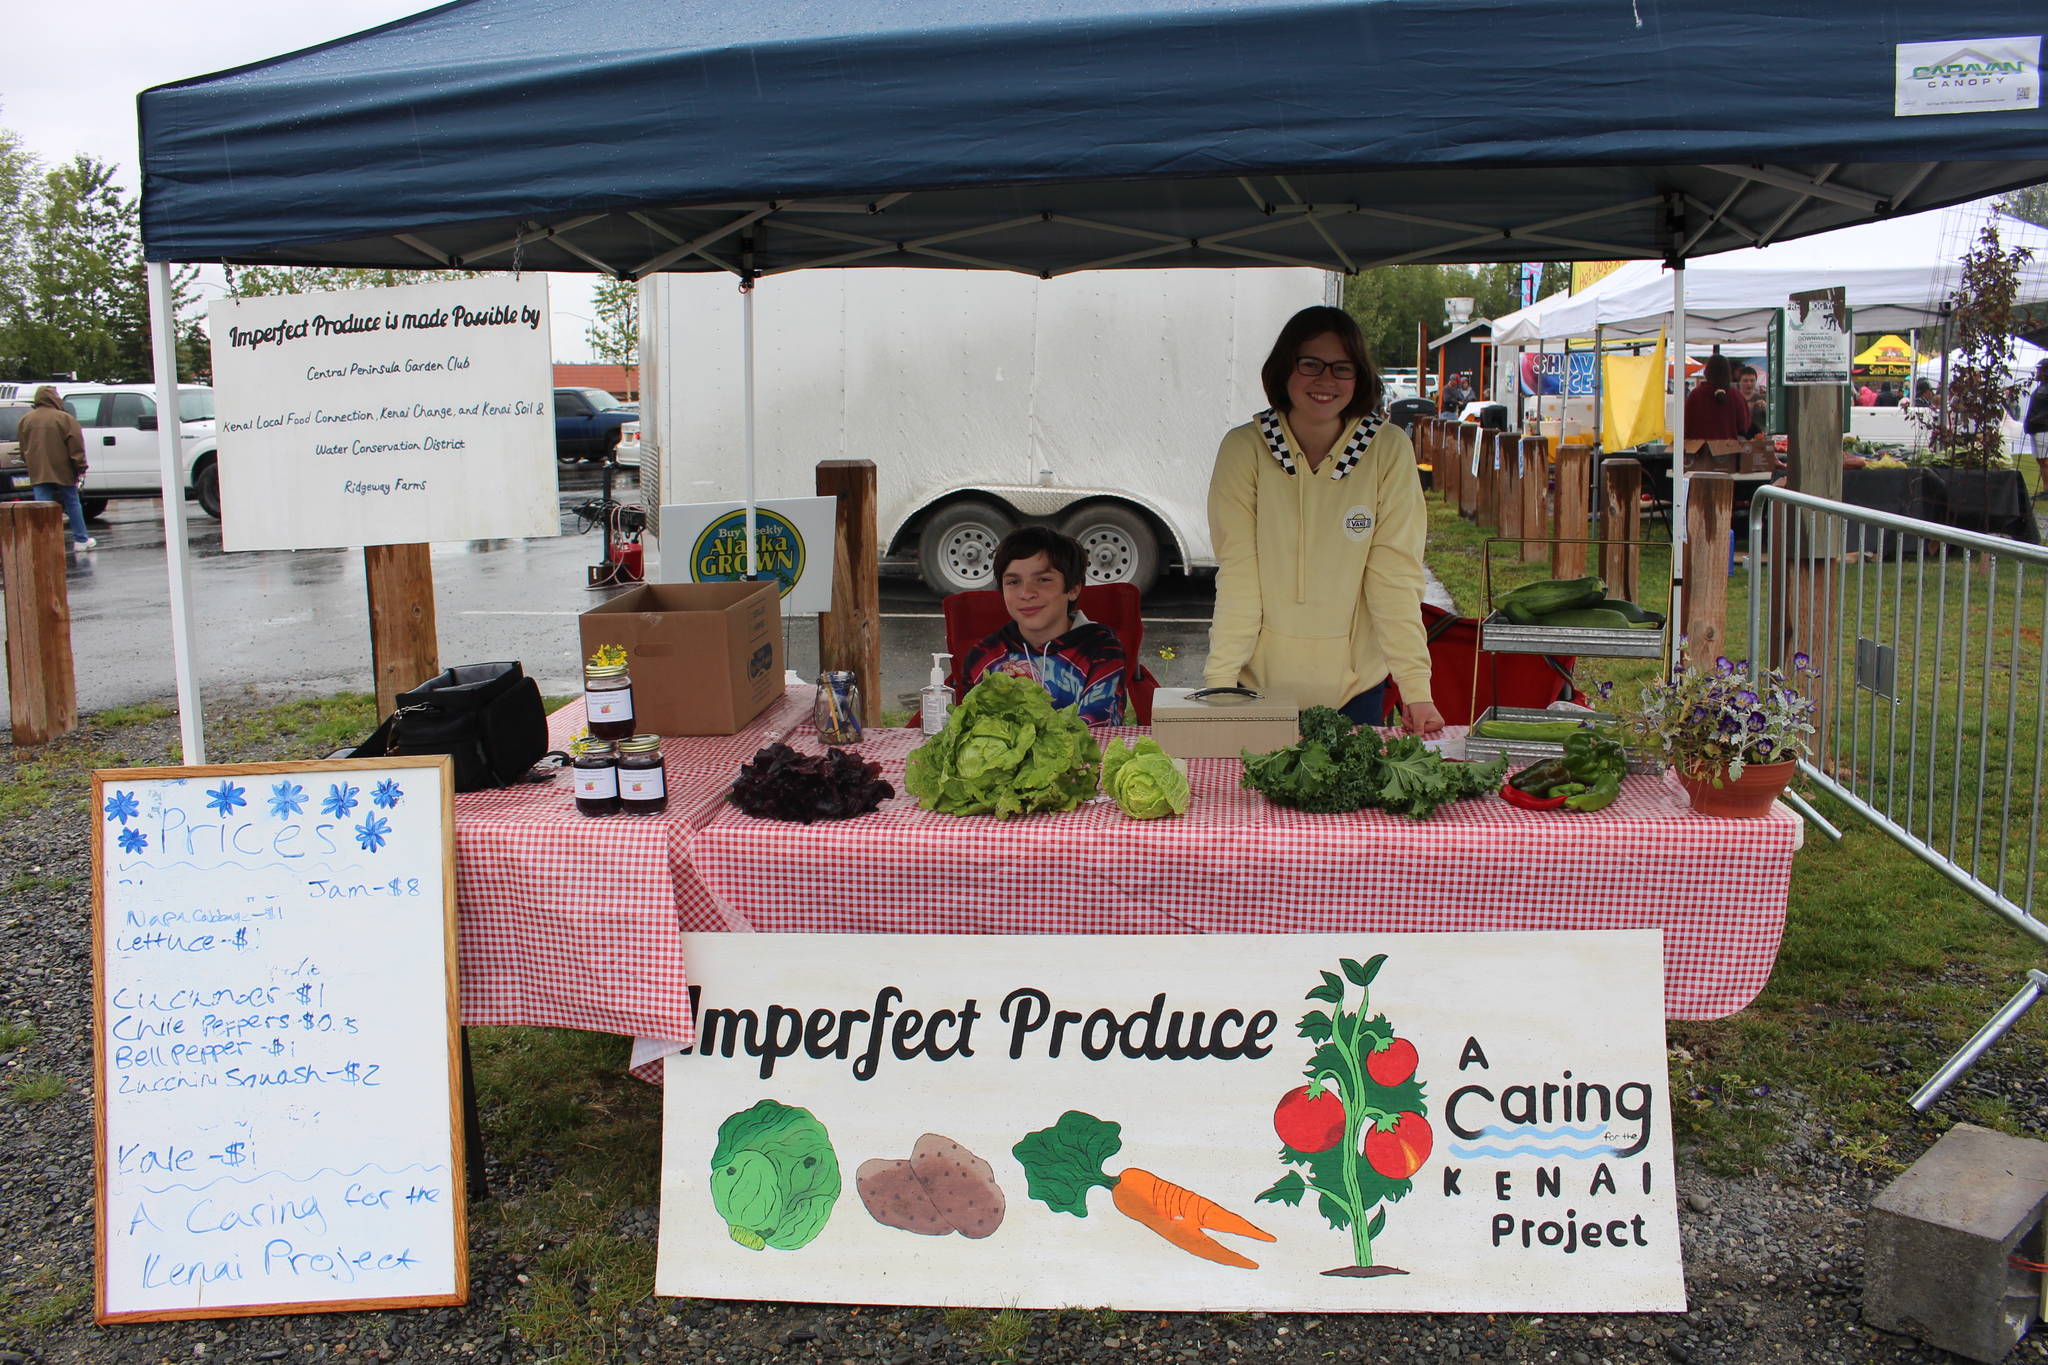 Nekoda Cooper, right, and Elijah Cooper, left, sell produce as part of Nekoda’s Caring for the Kenai Project, “Imperfect Produce”, during Progress Days in Soldotna Creek Park on July 22, 2020. (Photo by Brian Mazurek/Peninsula Clarion)